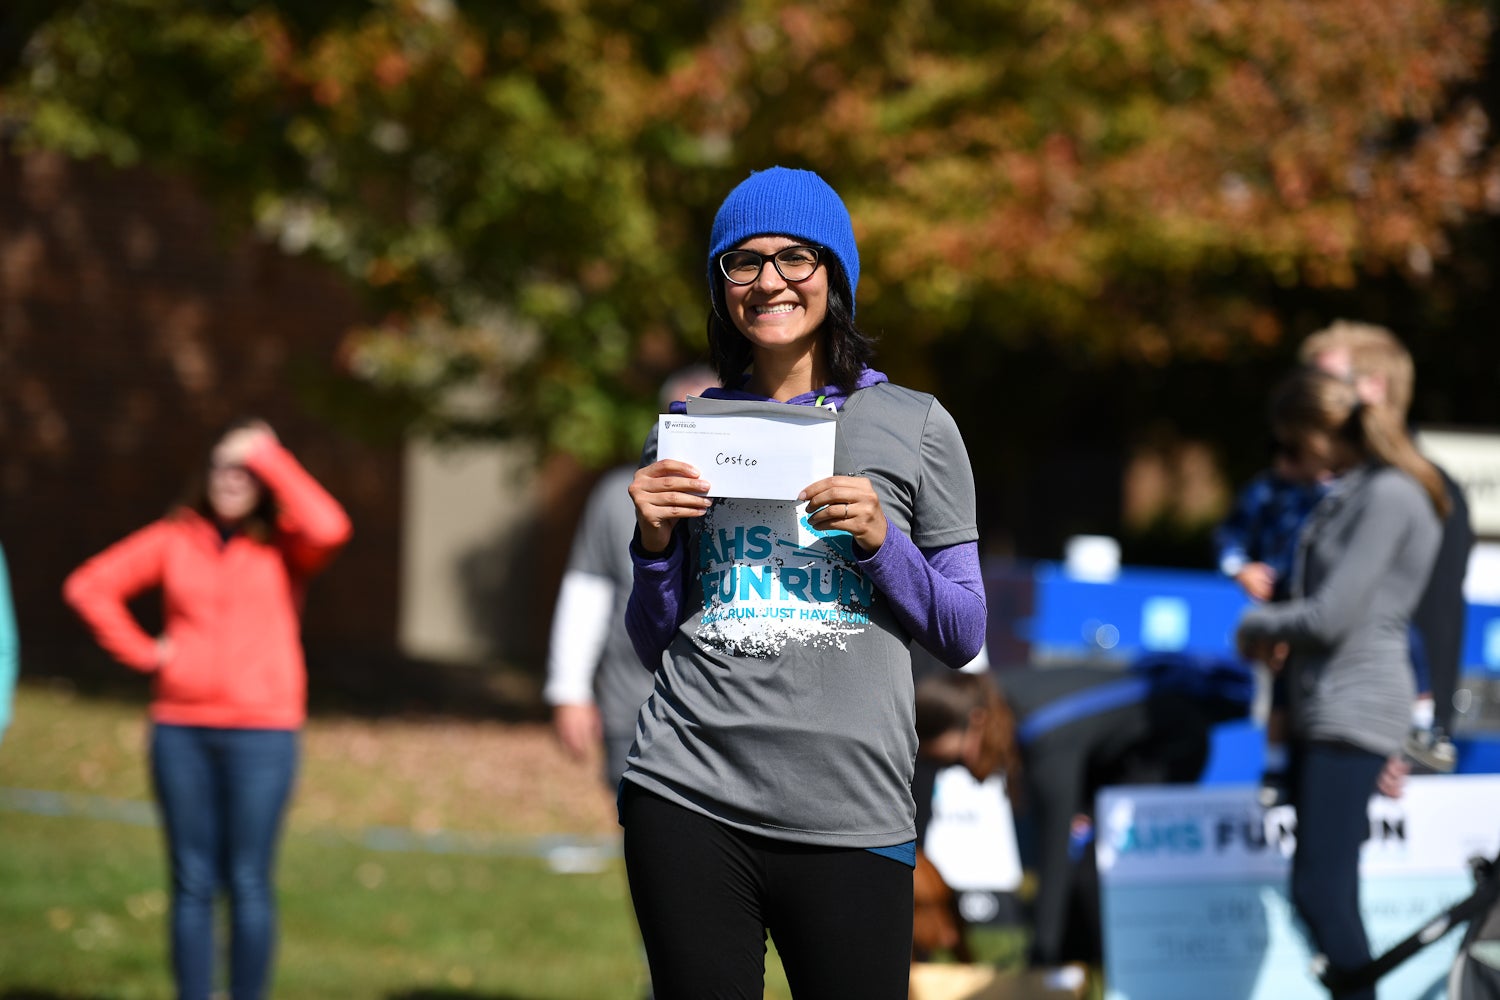 Fun Run prize winner smiling with envelope in hand